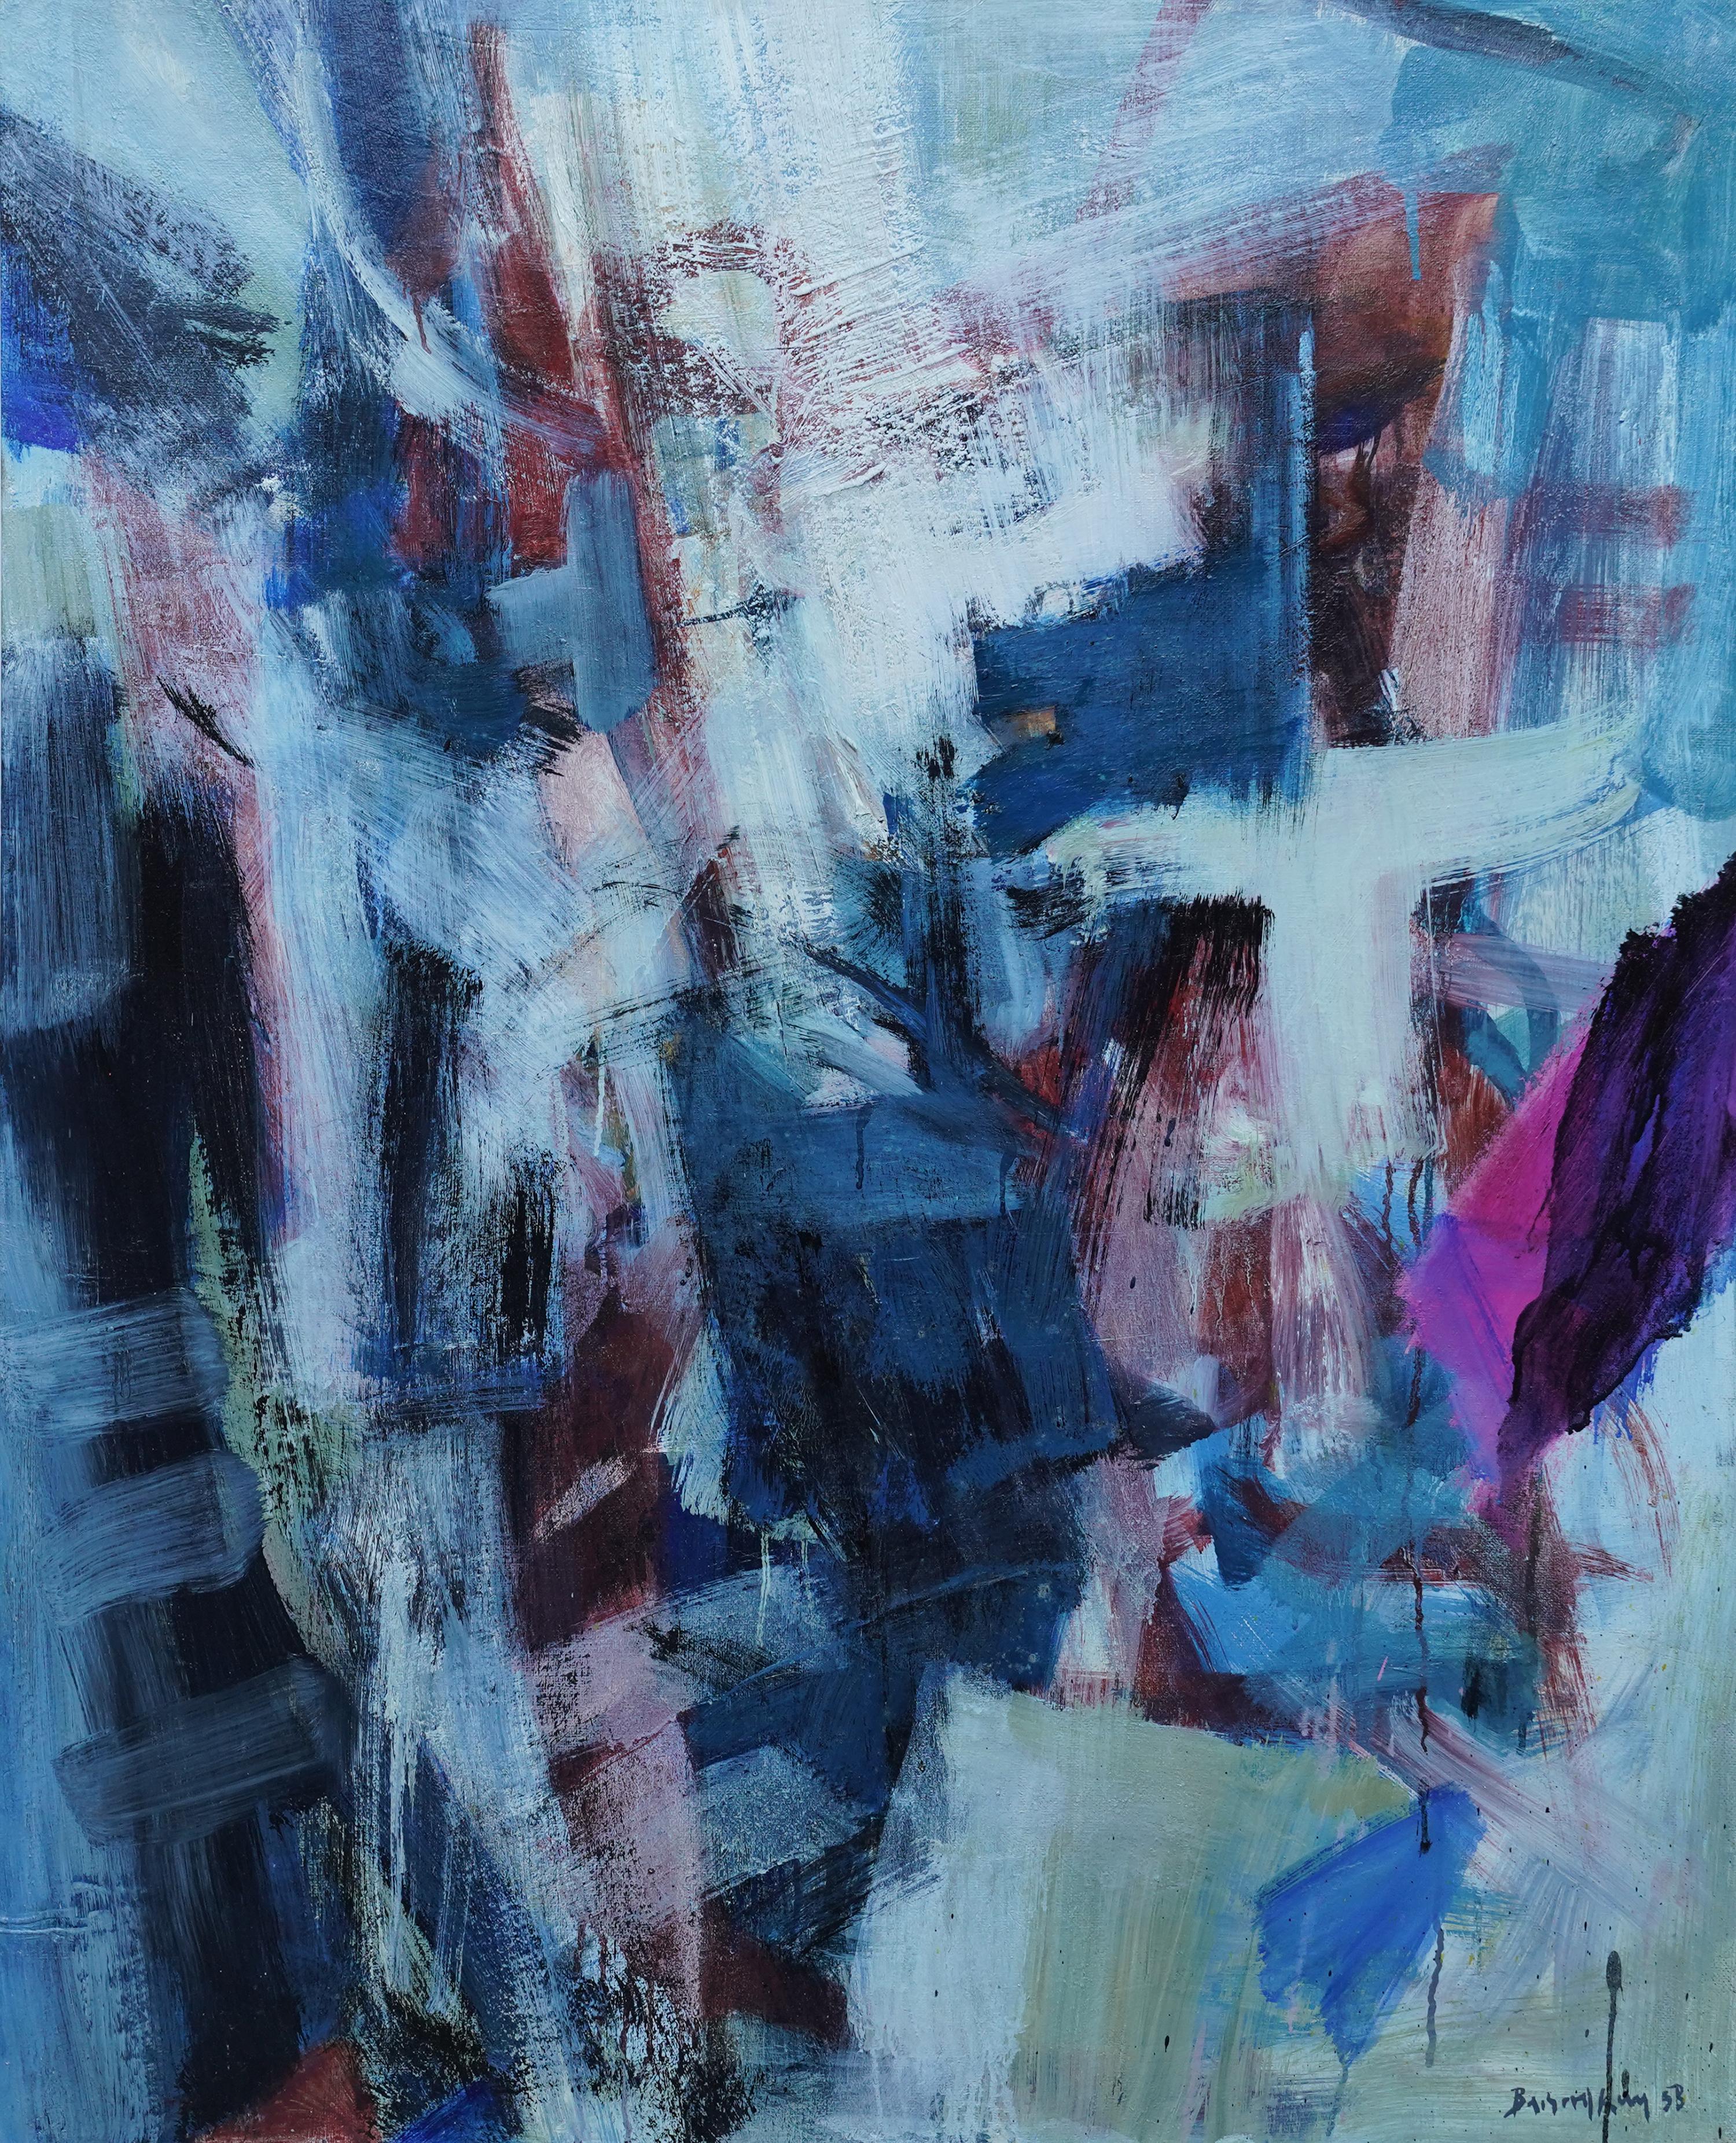 Blue Psalm - British Fifties Abstract Expressionist exhibited art oil painting - Painting by Bernard Kay 